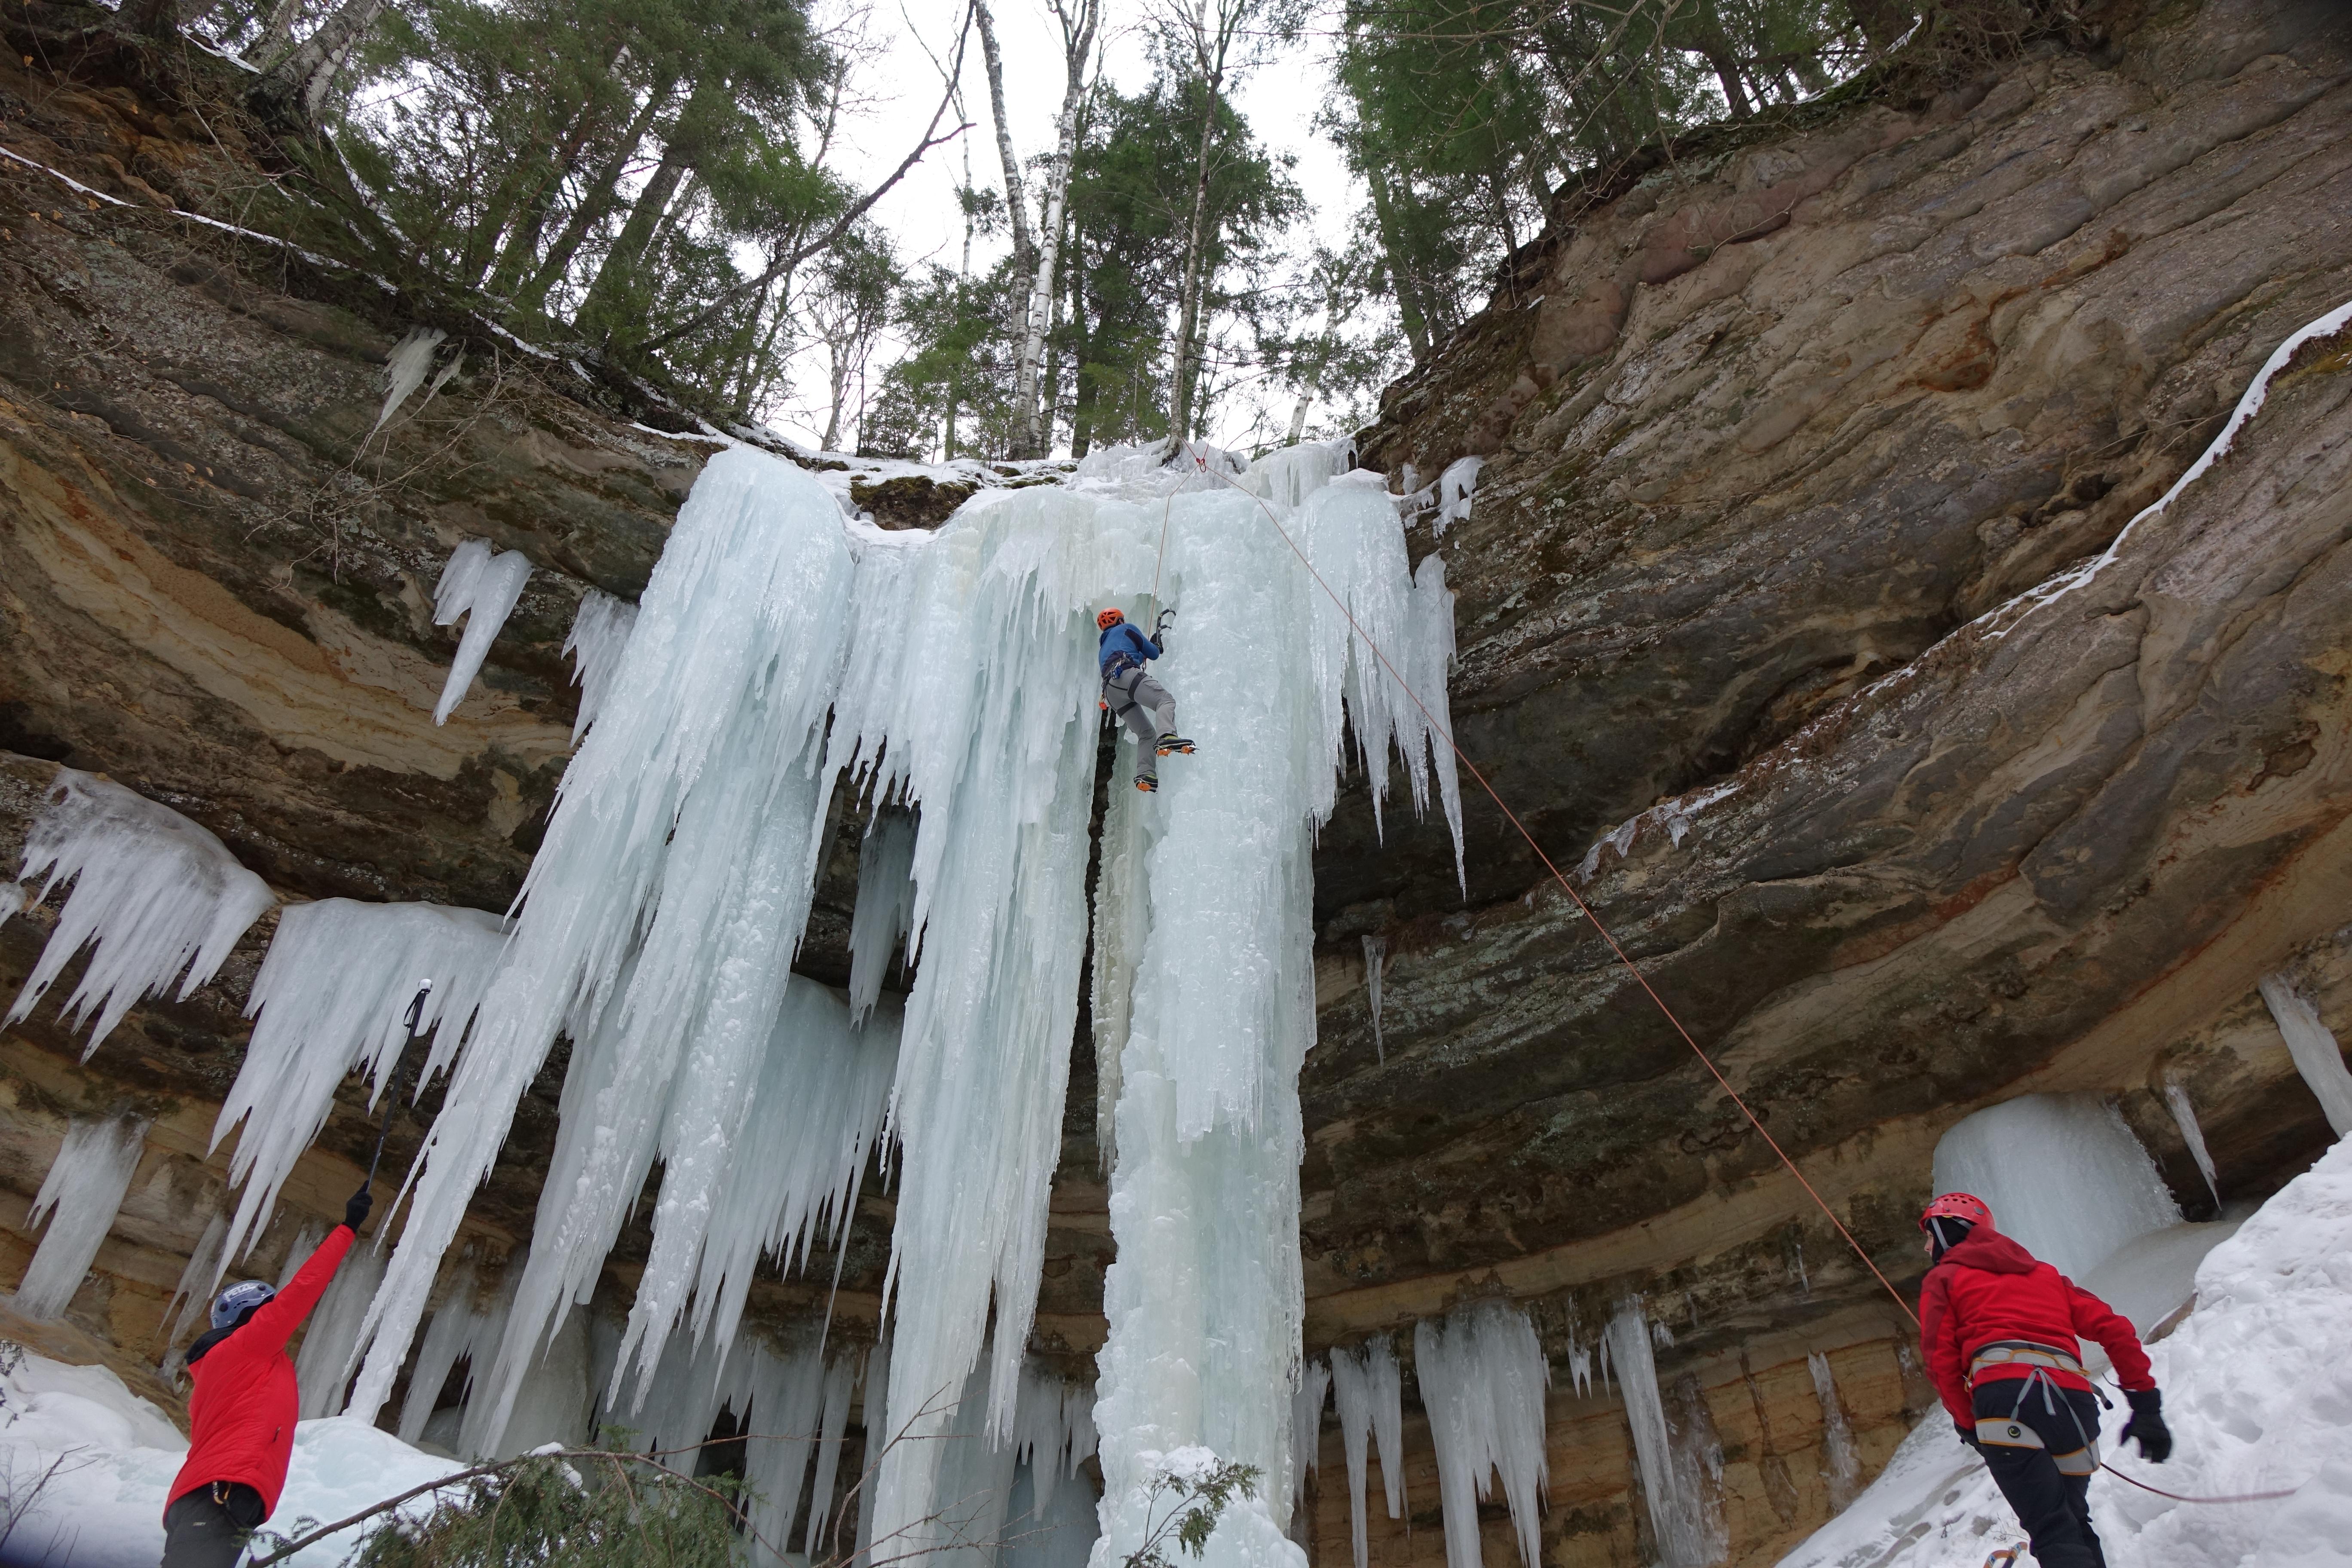 Ice climber on a curtain of ice along the Pictured Rocks Escarpment